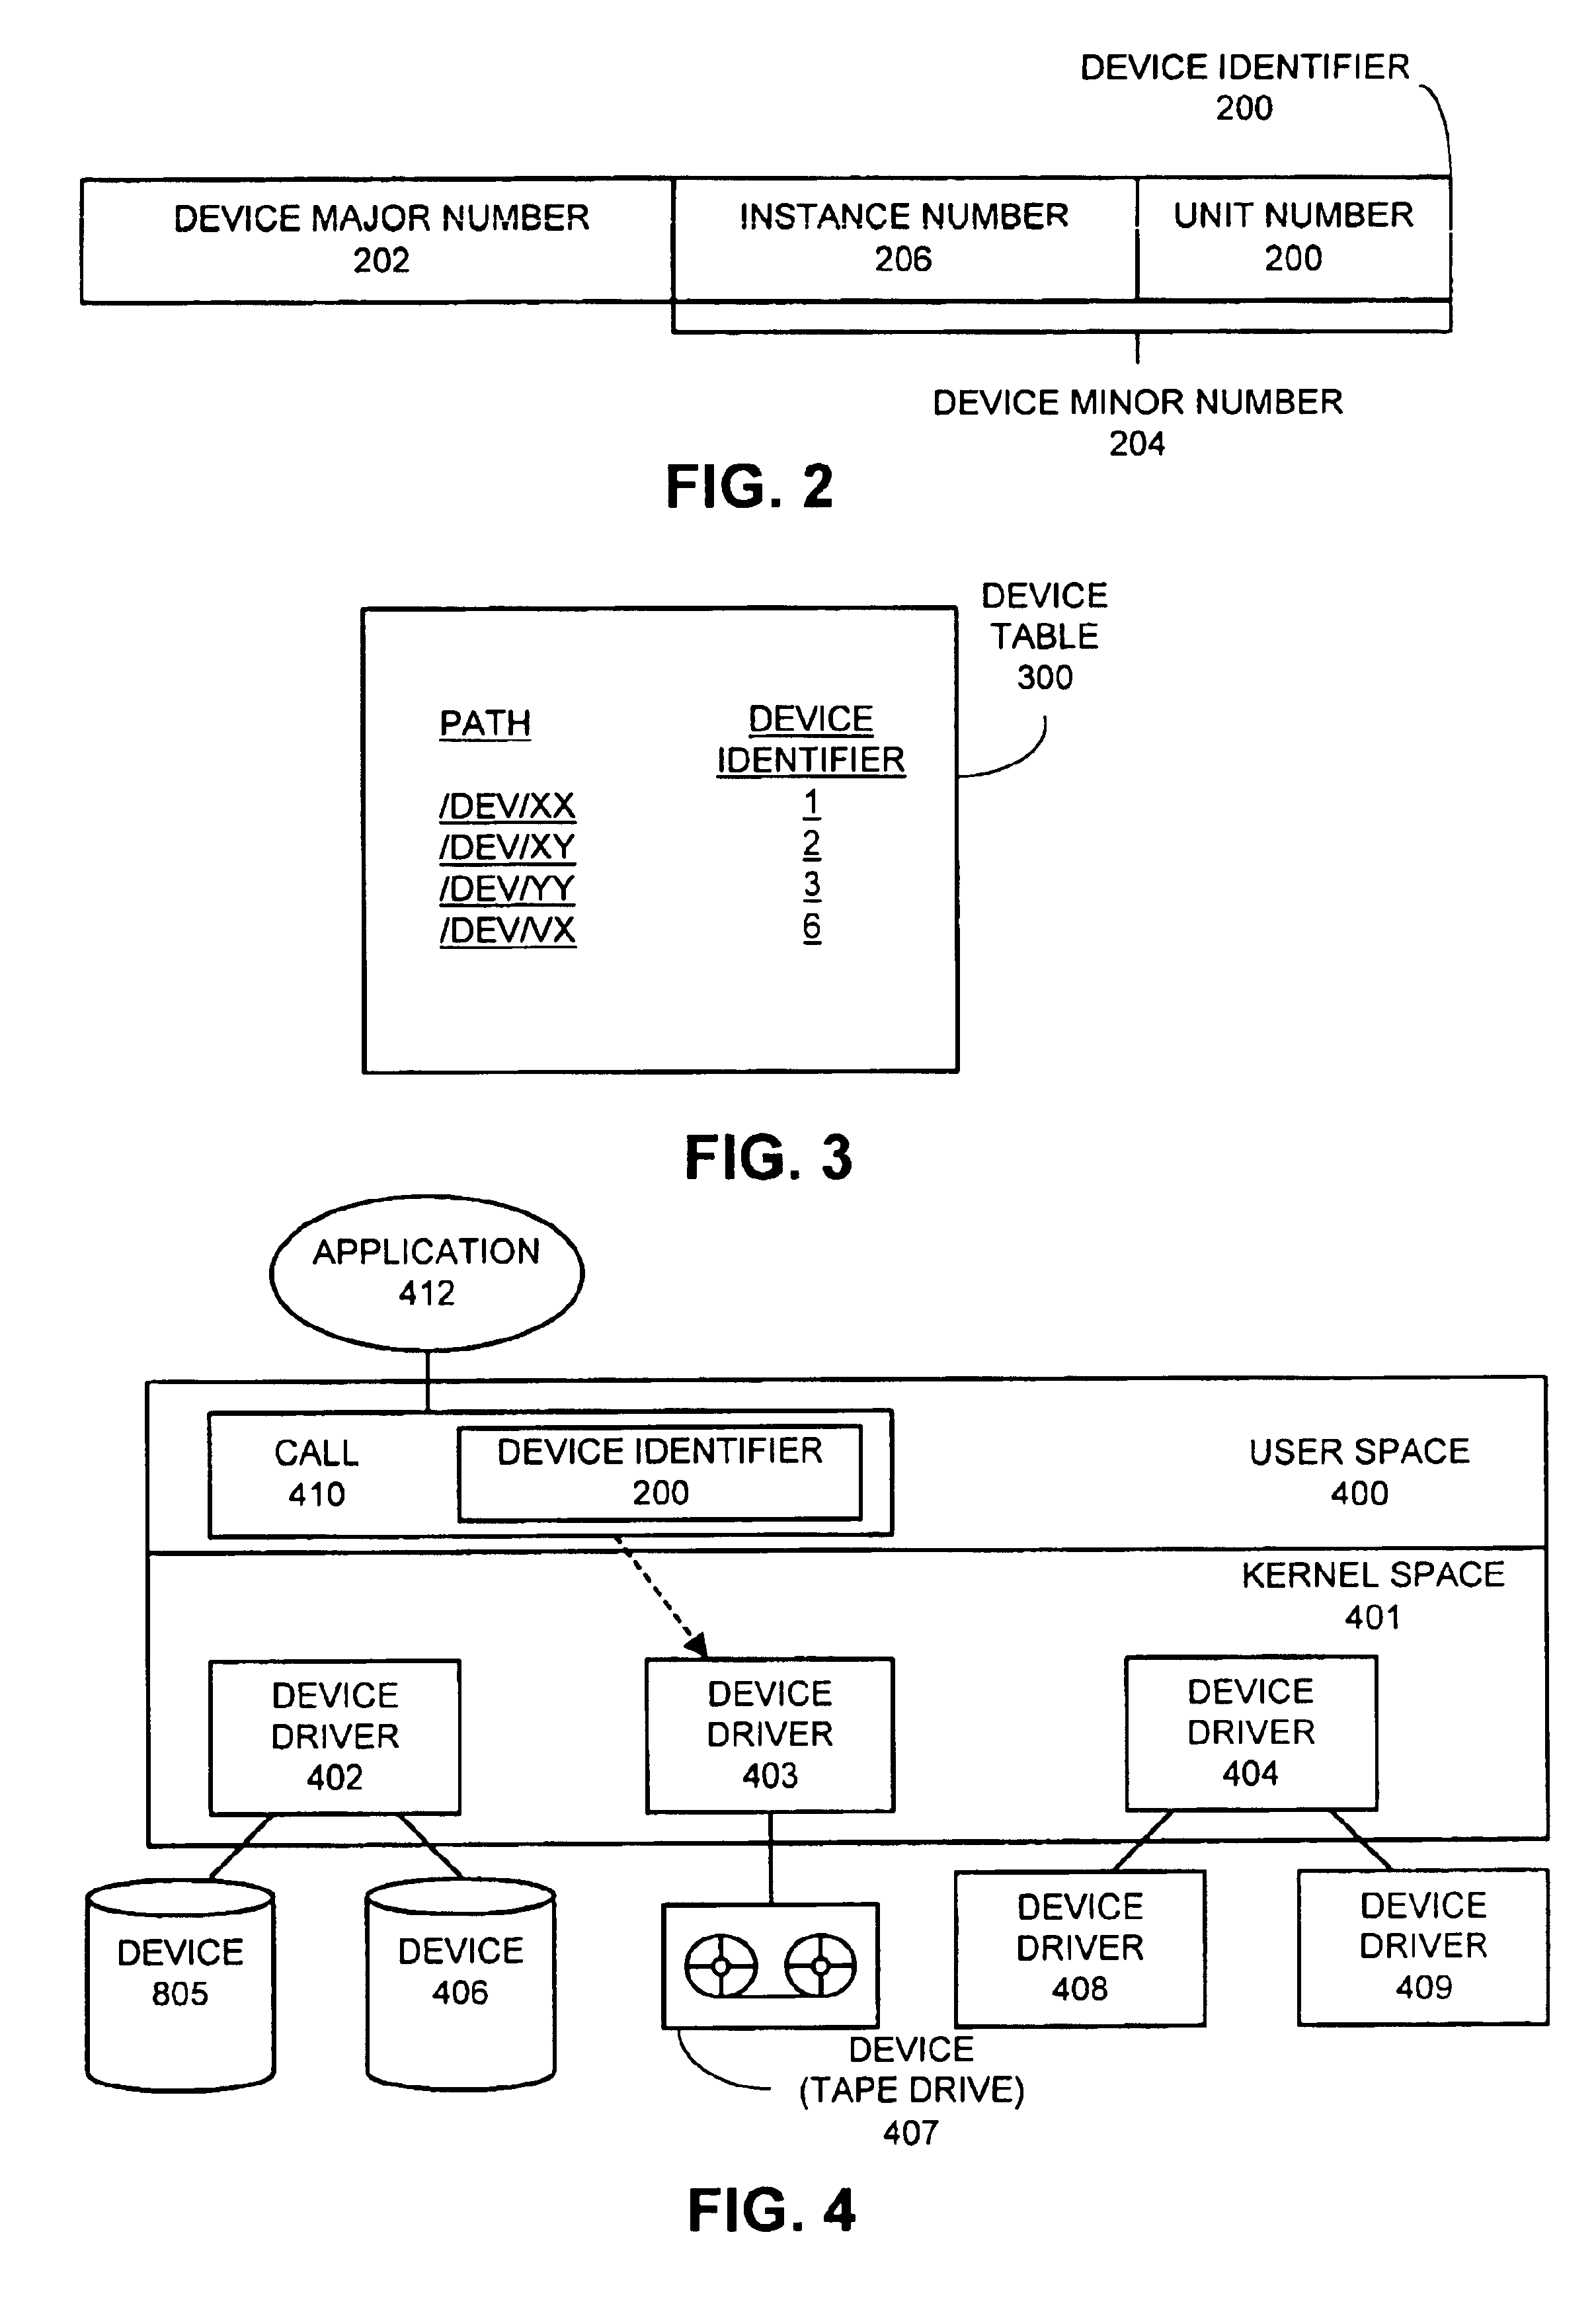 Method and apparatus for assigning unique device identifiers across a distributed computing system